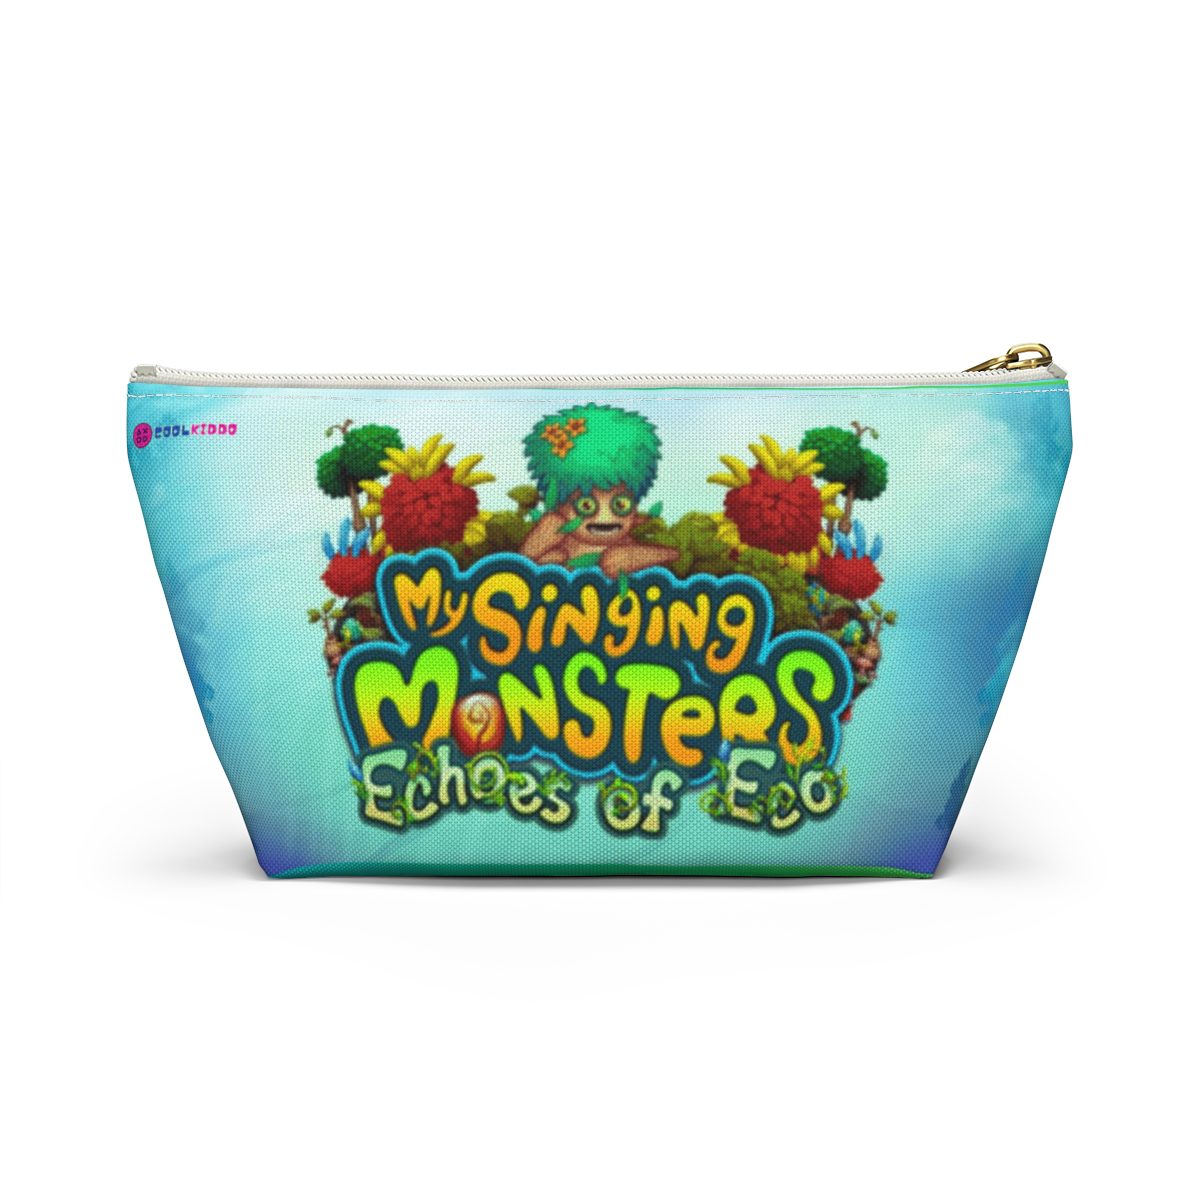 My Singing Monsters Echoes of Eco Pencil Pouch Cool Kiddo 12